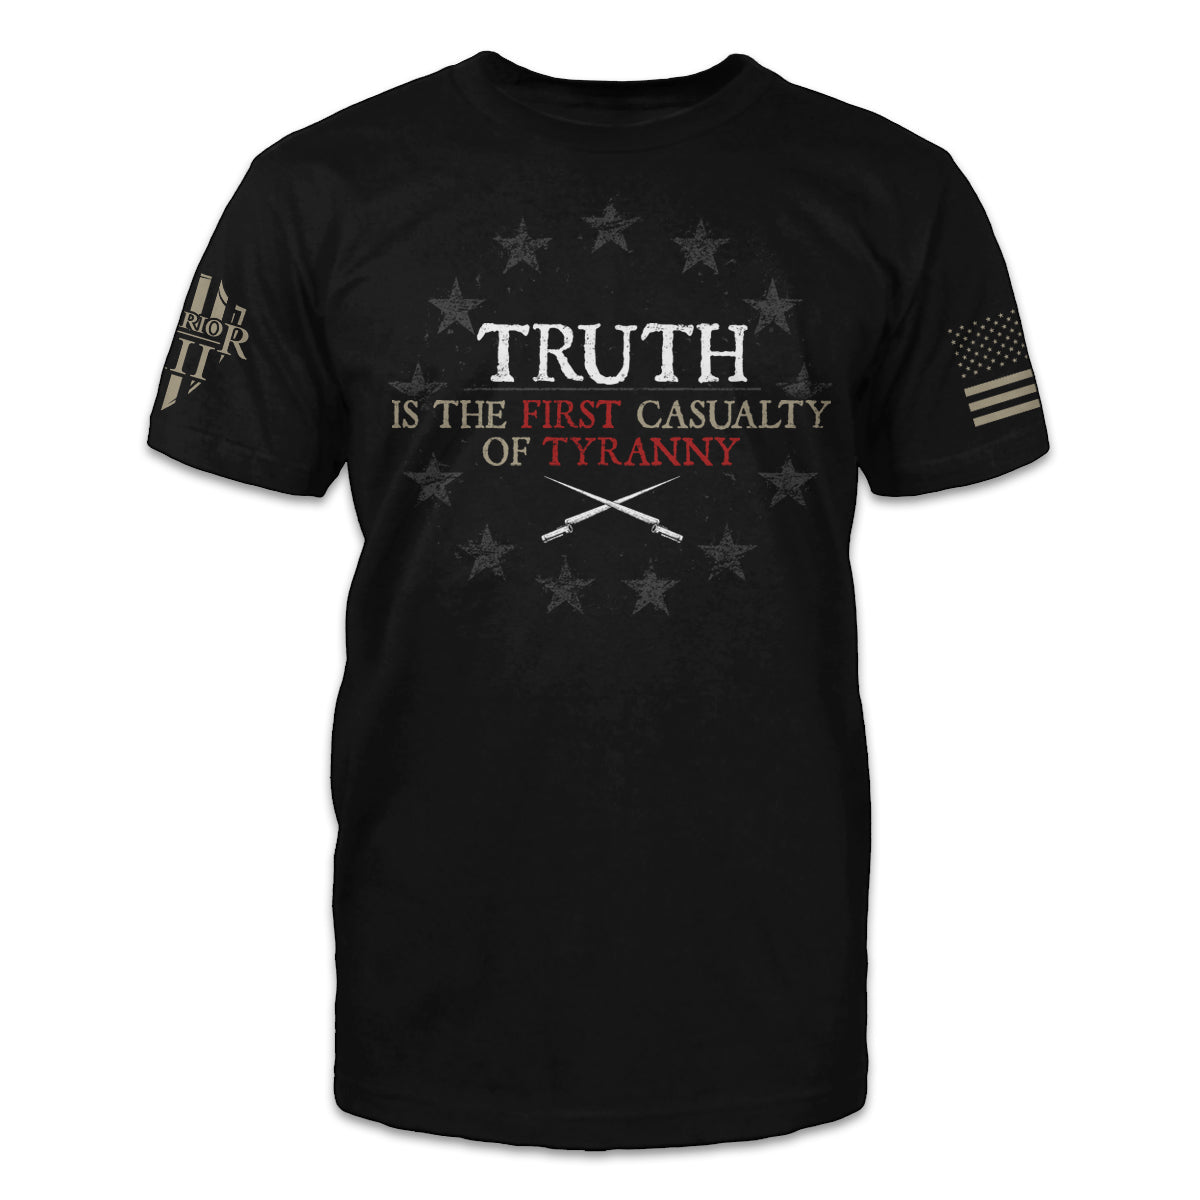 A black t-shirt with the words "Truth is the first casualty of tyranny" printed on the front of the shirt.